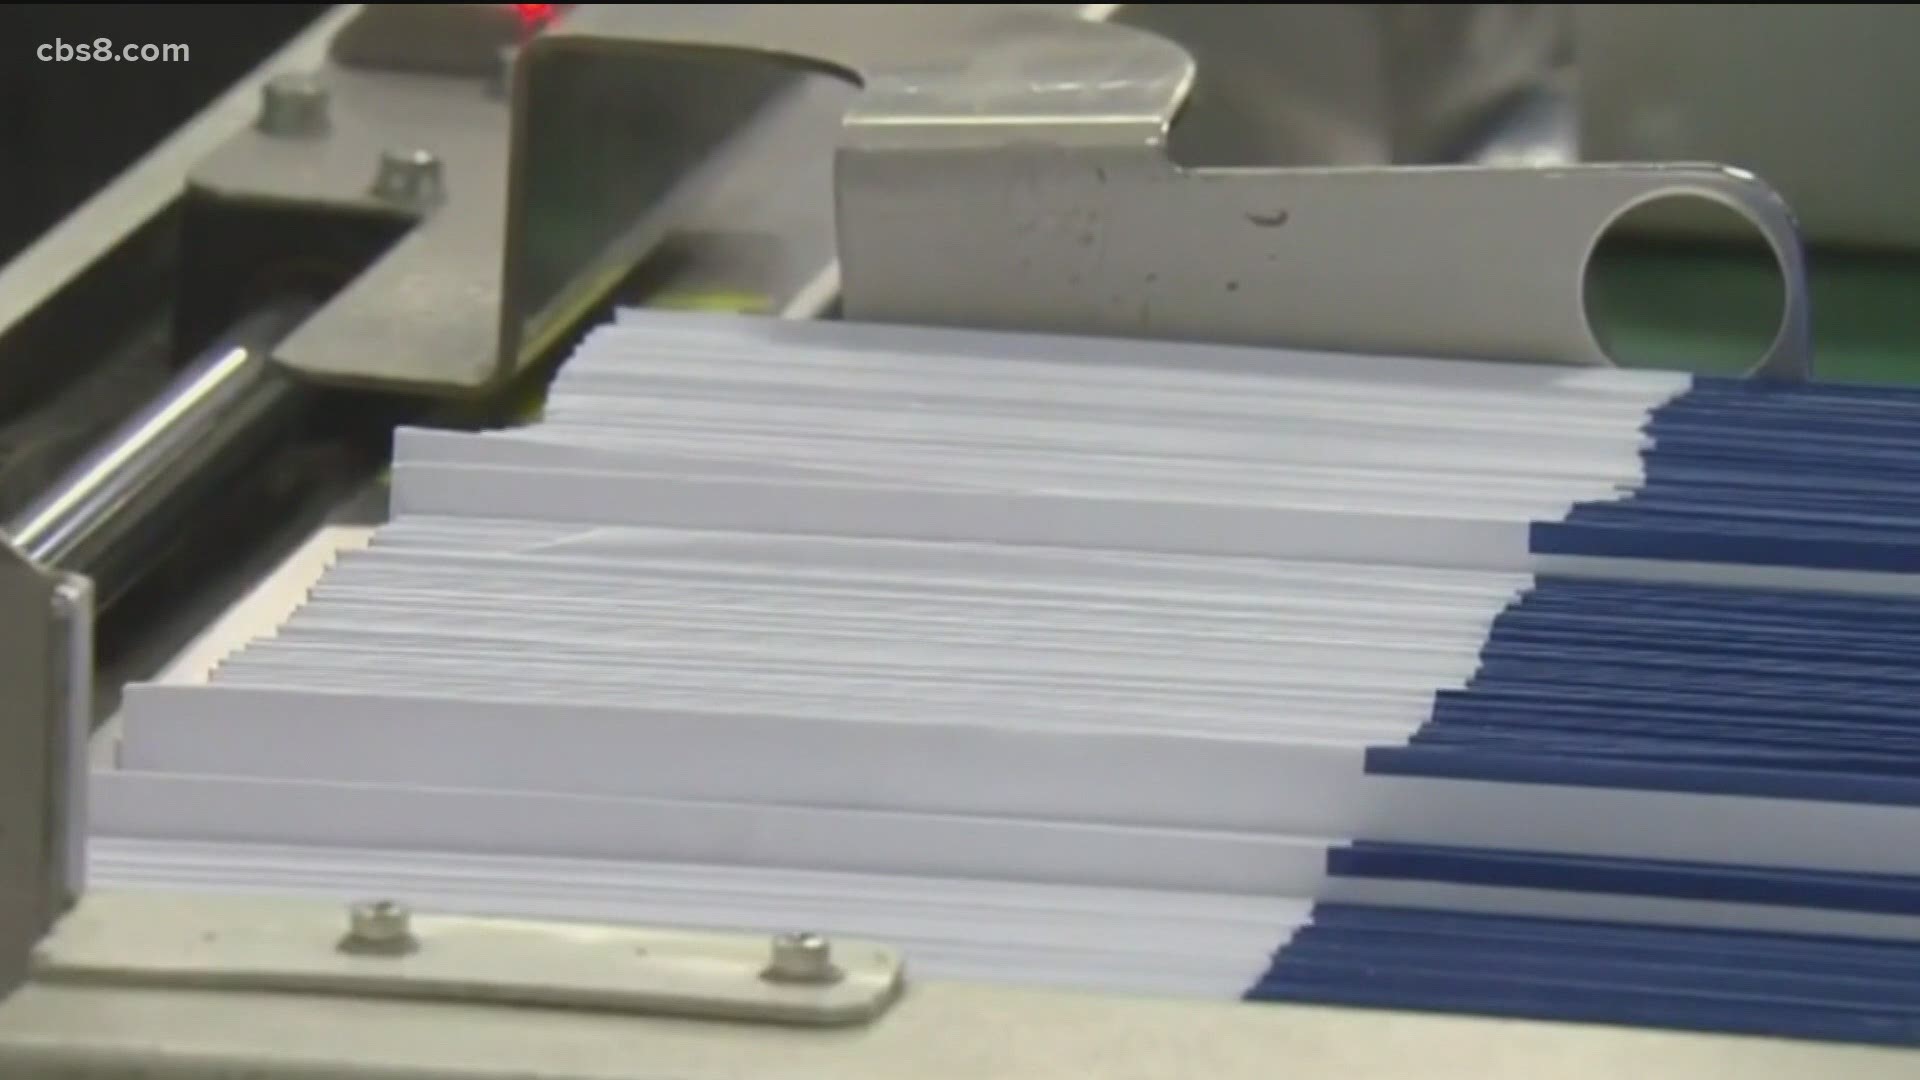 1.9 million mail-in ballots will be sent out to registered voters in San Diego.